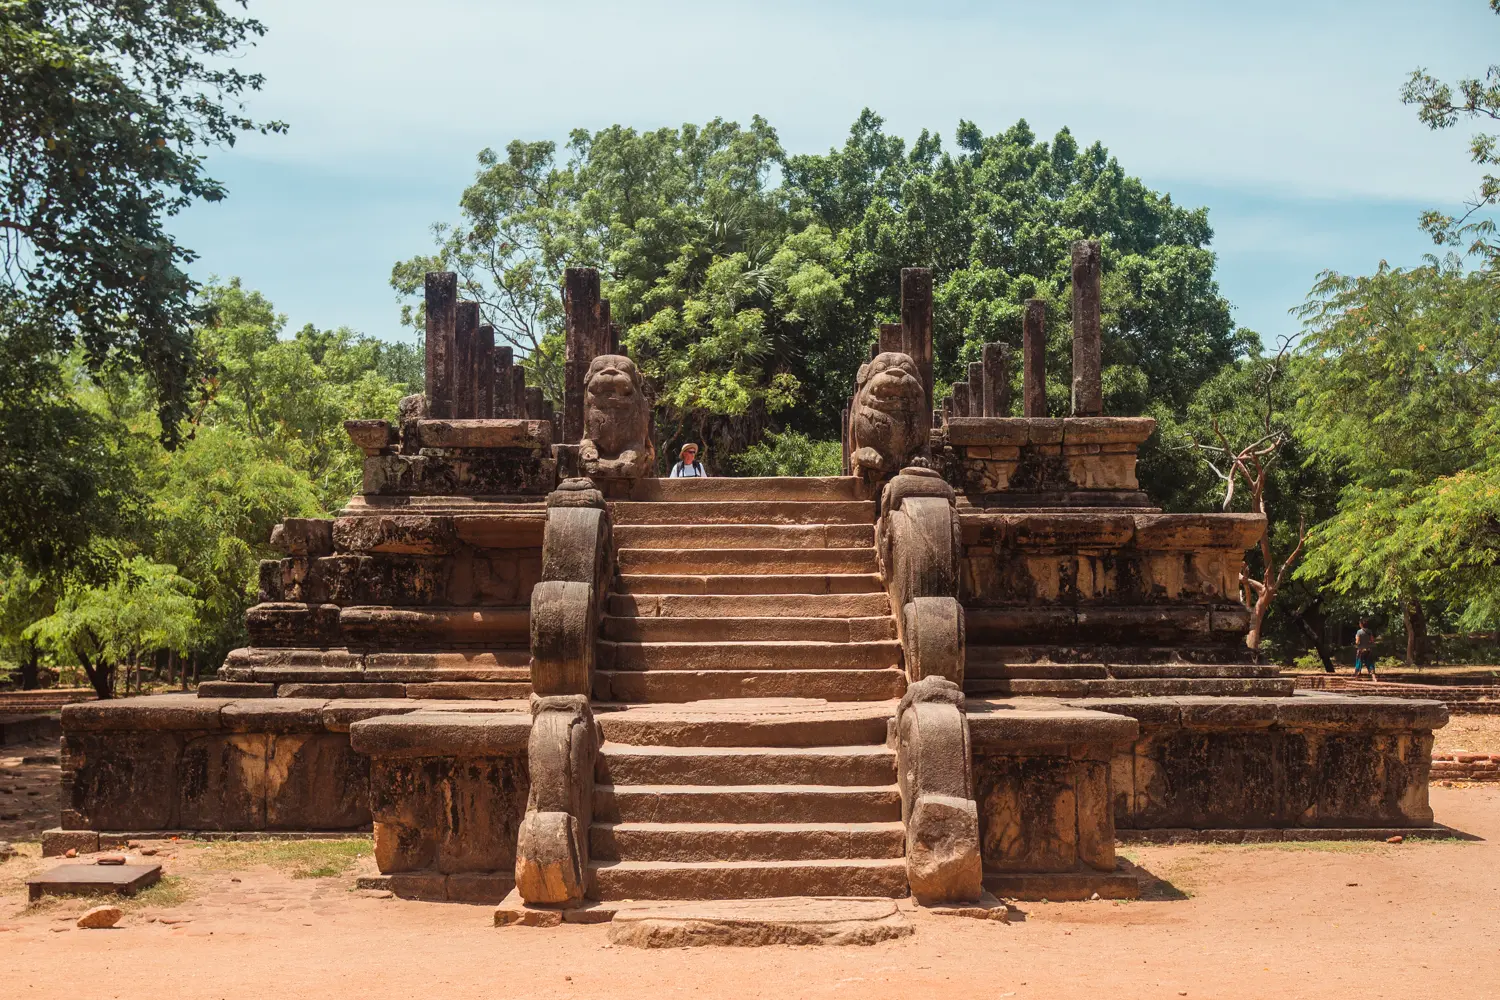 The audience hall, or council chambers, in Polonnaruwa with stairs leading up to two stone lions on a brick foundations with pillars.